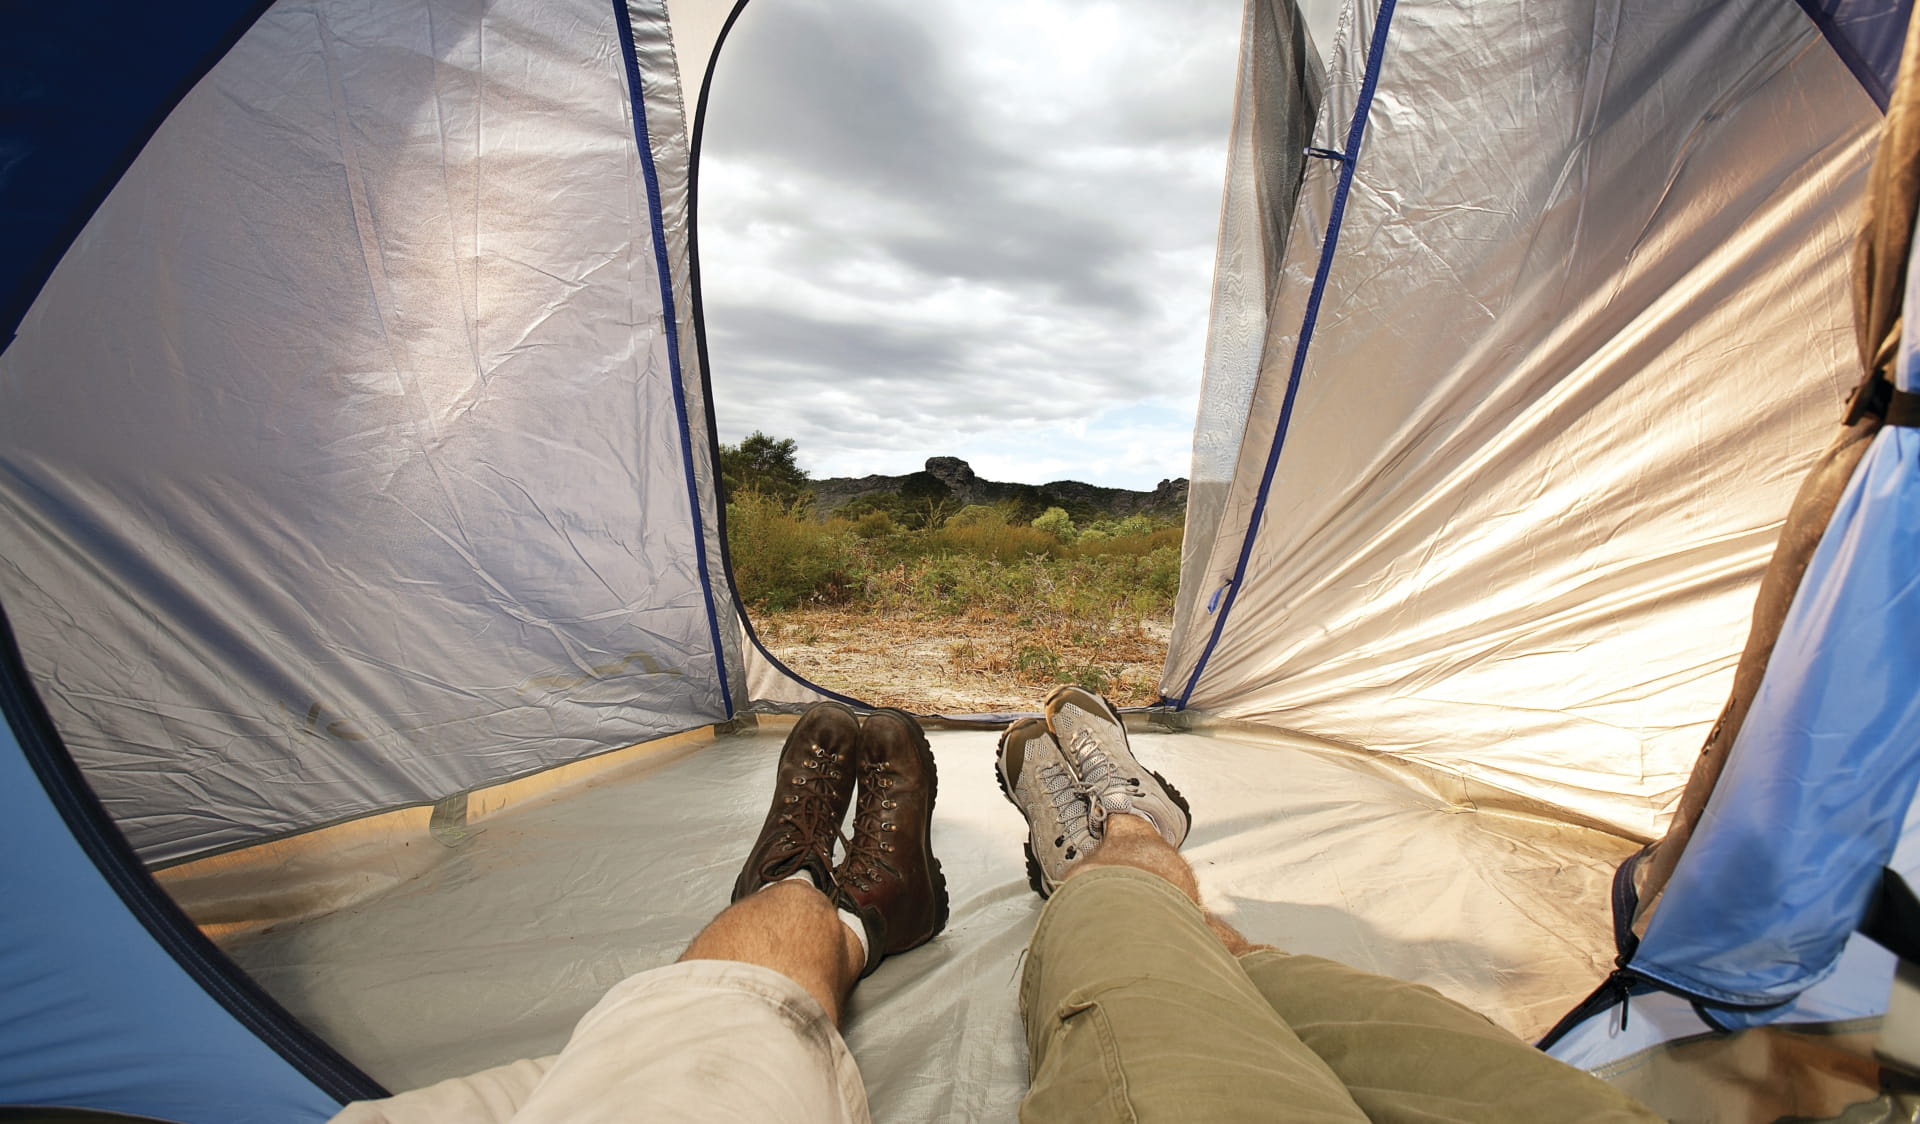 The view from inside a tent, looking out to the grassy landscape and cloudy sky.